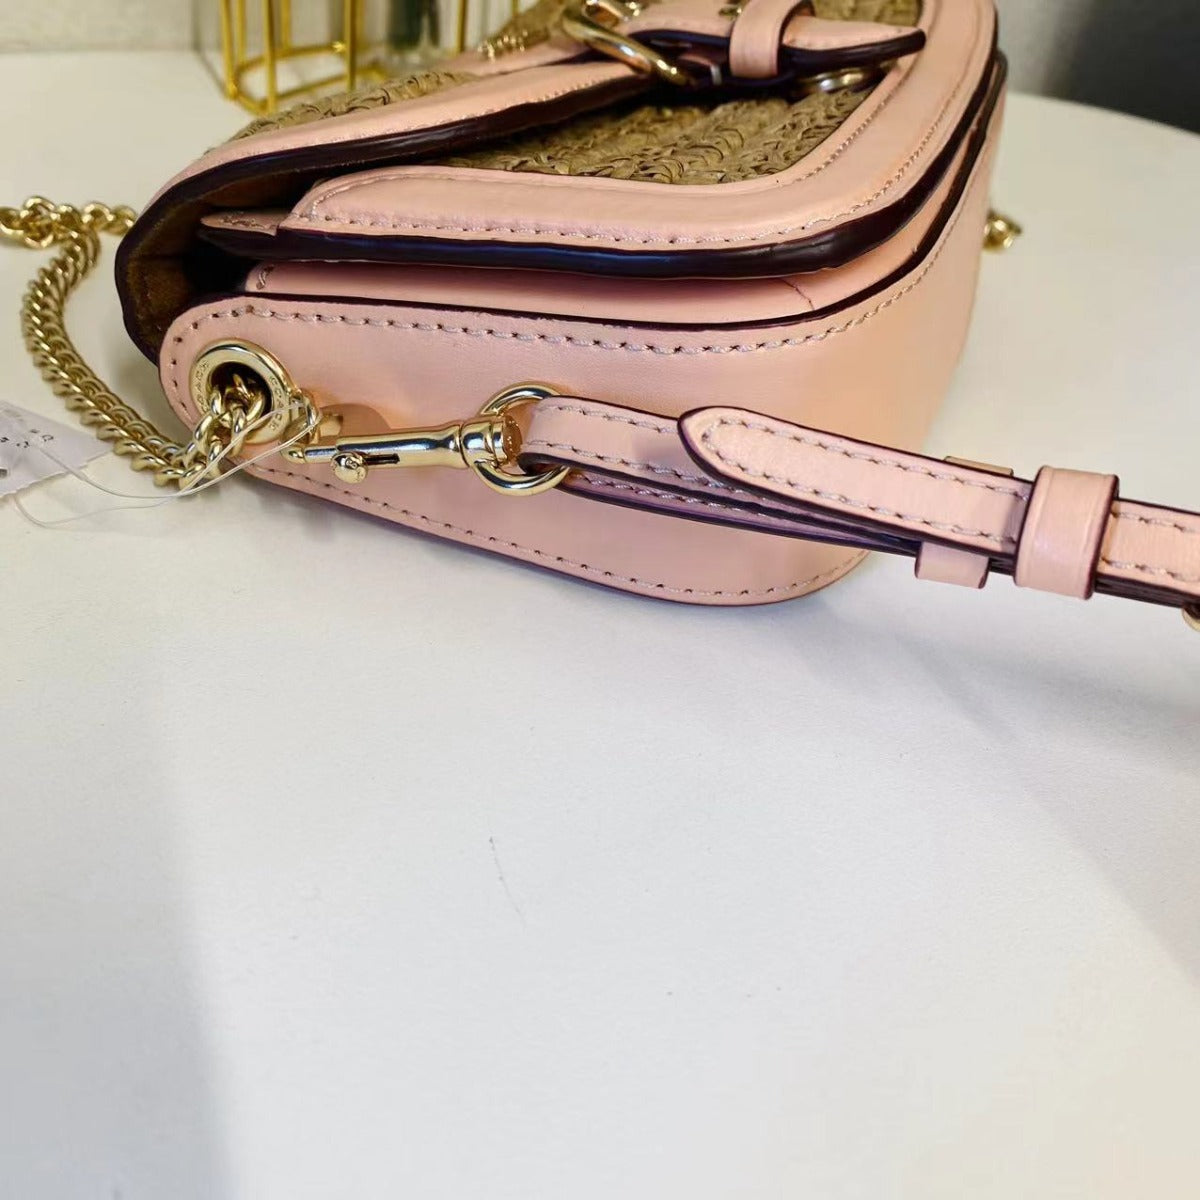 Coach C9925 Kleo Crossbody In Gold/Natural/Faded Blush